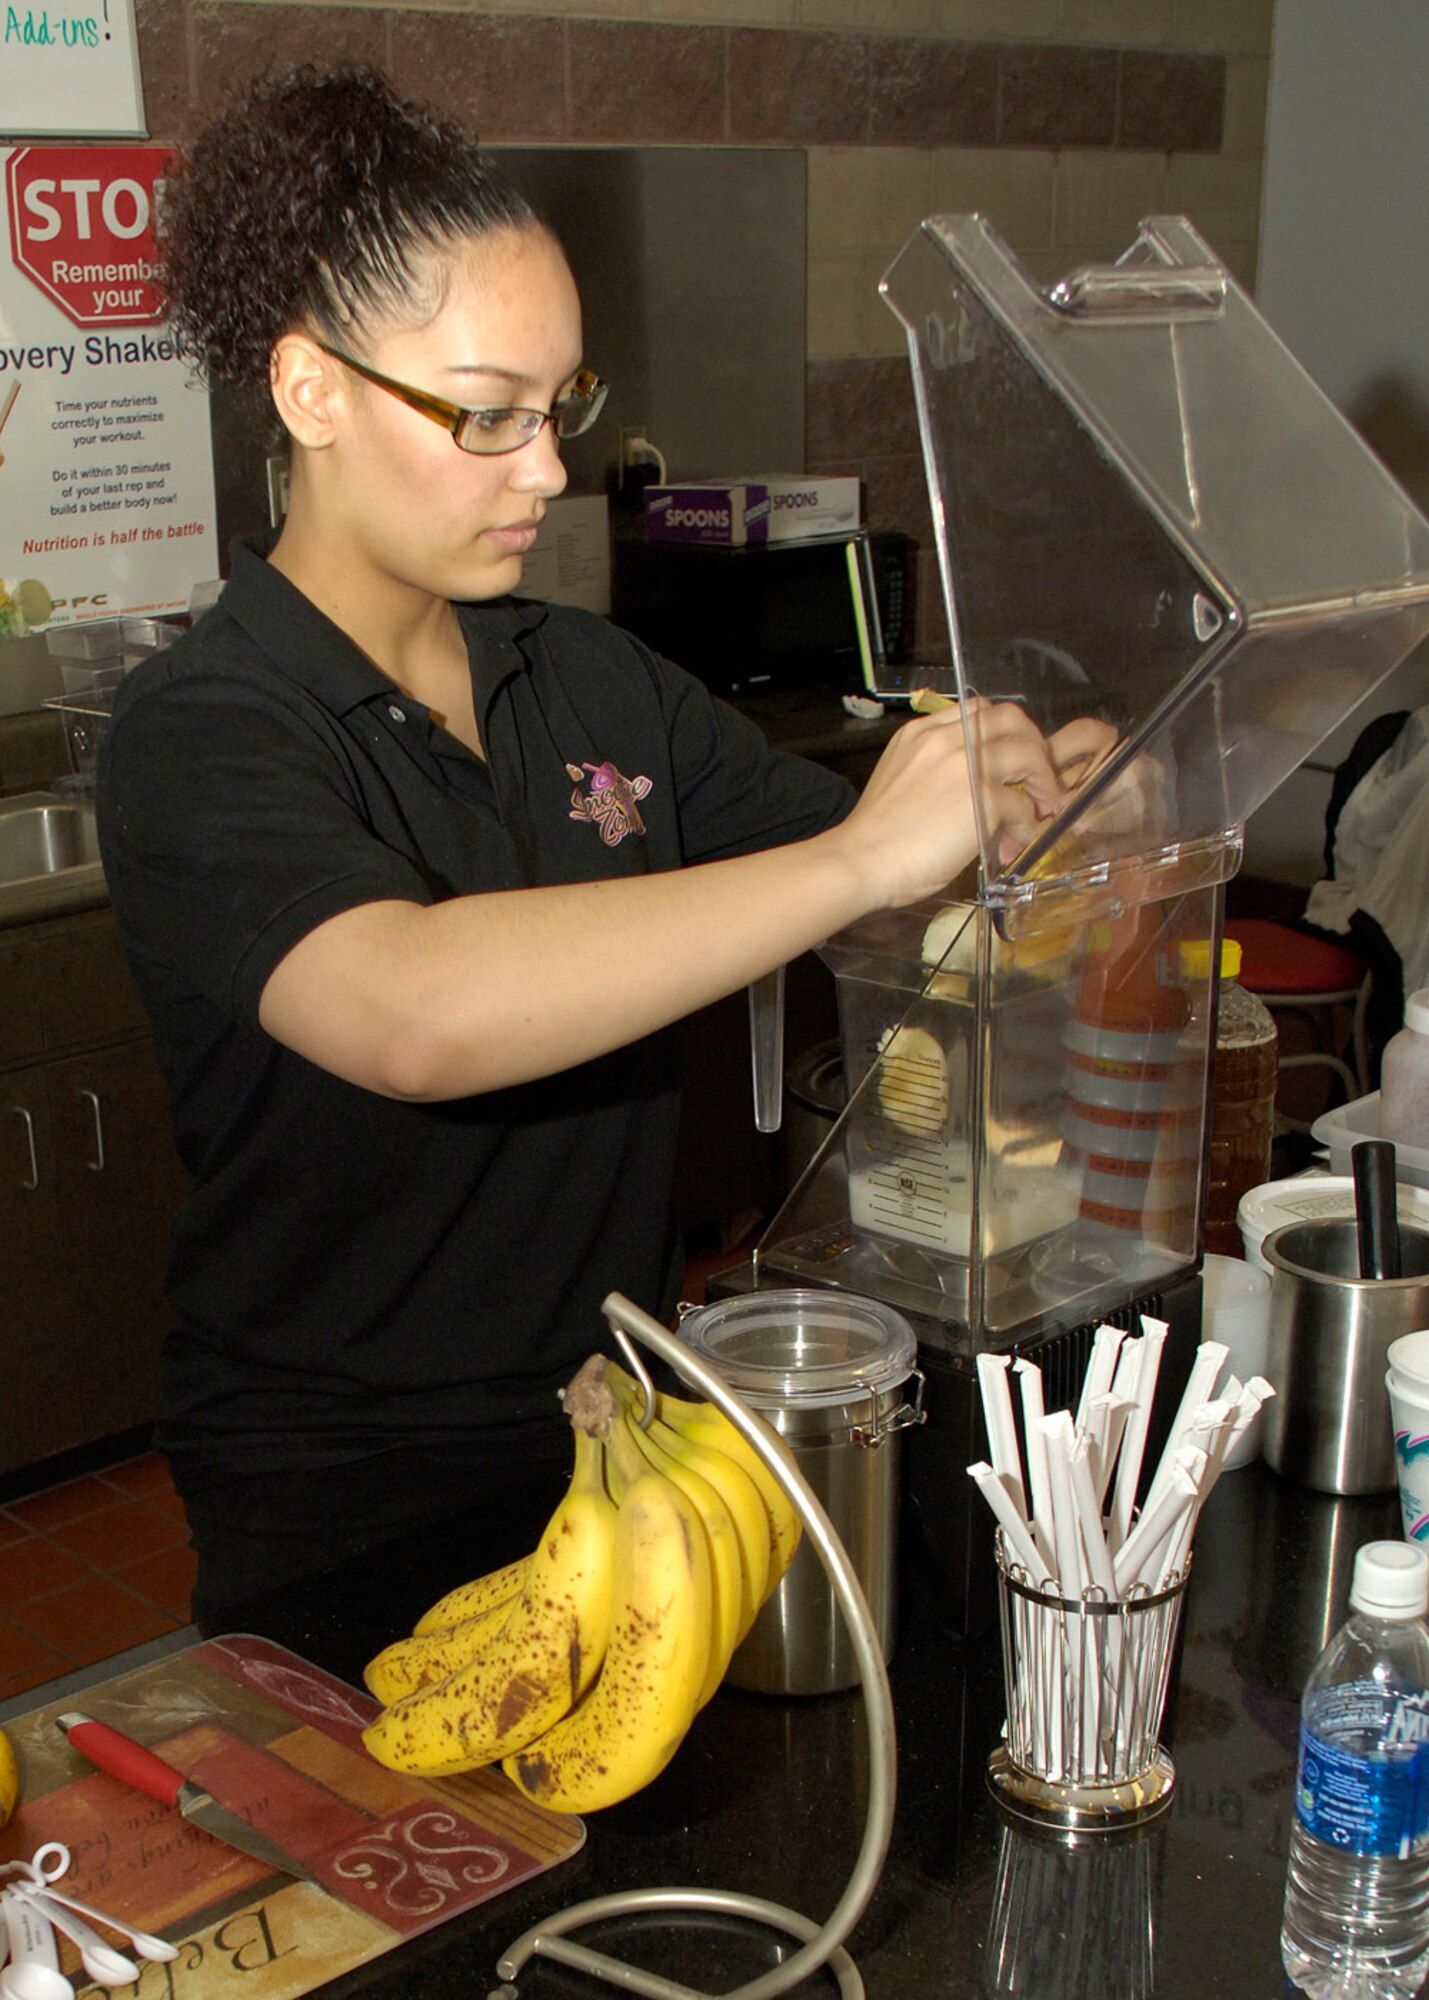 Ms. Chante Rue, Smoothie Zone employee, makes a smoothie March 19, 2008, at Holloman Air Force Base, N.M. The Smoothie Zone recently opened March 14. (U.S. Air Force photo/Airman 1st Class Michael J. Means )